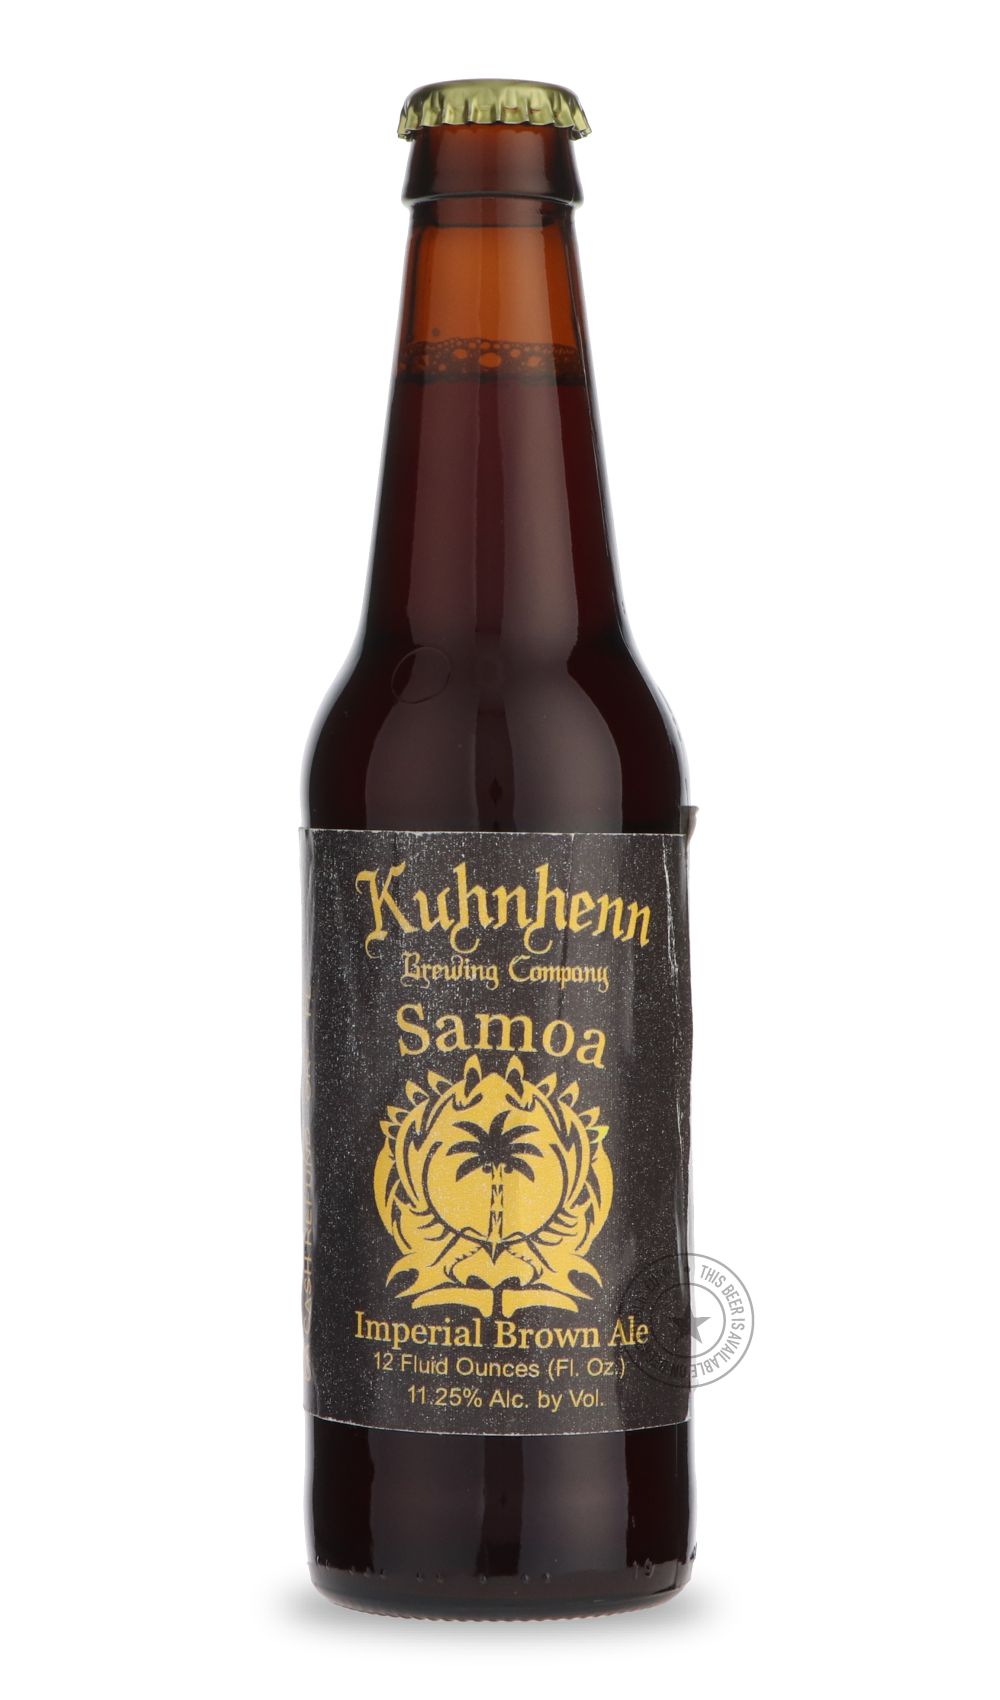 -Kuhnhenn- Samoa Imperial Brown Ale-Brown & Dark- Only @ Beer Republic - The best online beer store for American & Canadian craft beer - Buy beer online from the USA and Canada - Bier online kopen - Amerikaans bier kopen - Craft beer store - Craft beer kopen - Amerikanisch bier kaufen - Bier online kaufen - Acheter biere online - IPA - Stout - Porter - New England IPA - Hazy IPA - Imperial Stout - Barrel Aged - Barrel Aged Imperial Stout - Brown - Dark beer - Blond - Blonde - Pilsner - Lager - Wheat - Weize